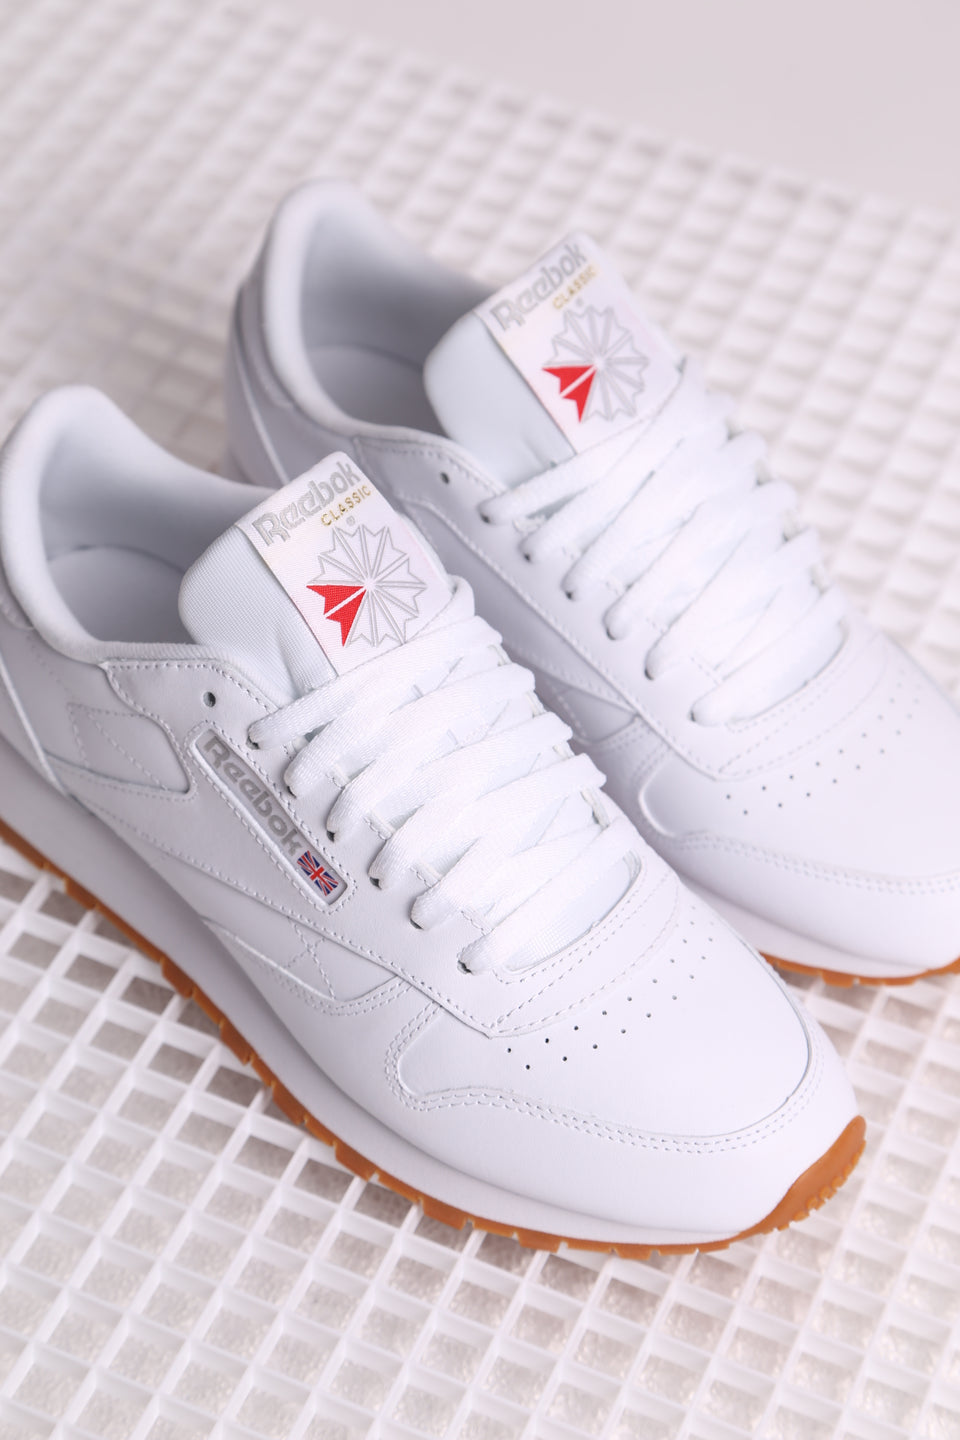 Reebok Classic Leather Homme - Blanc